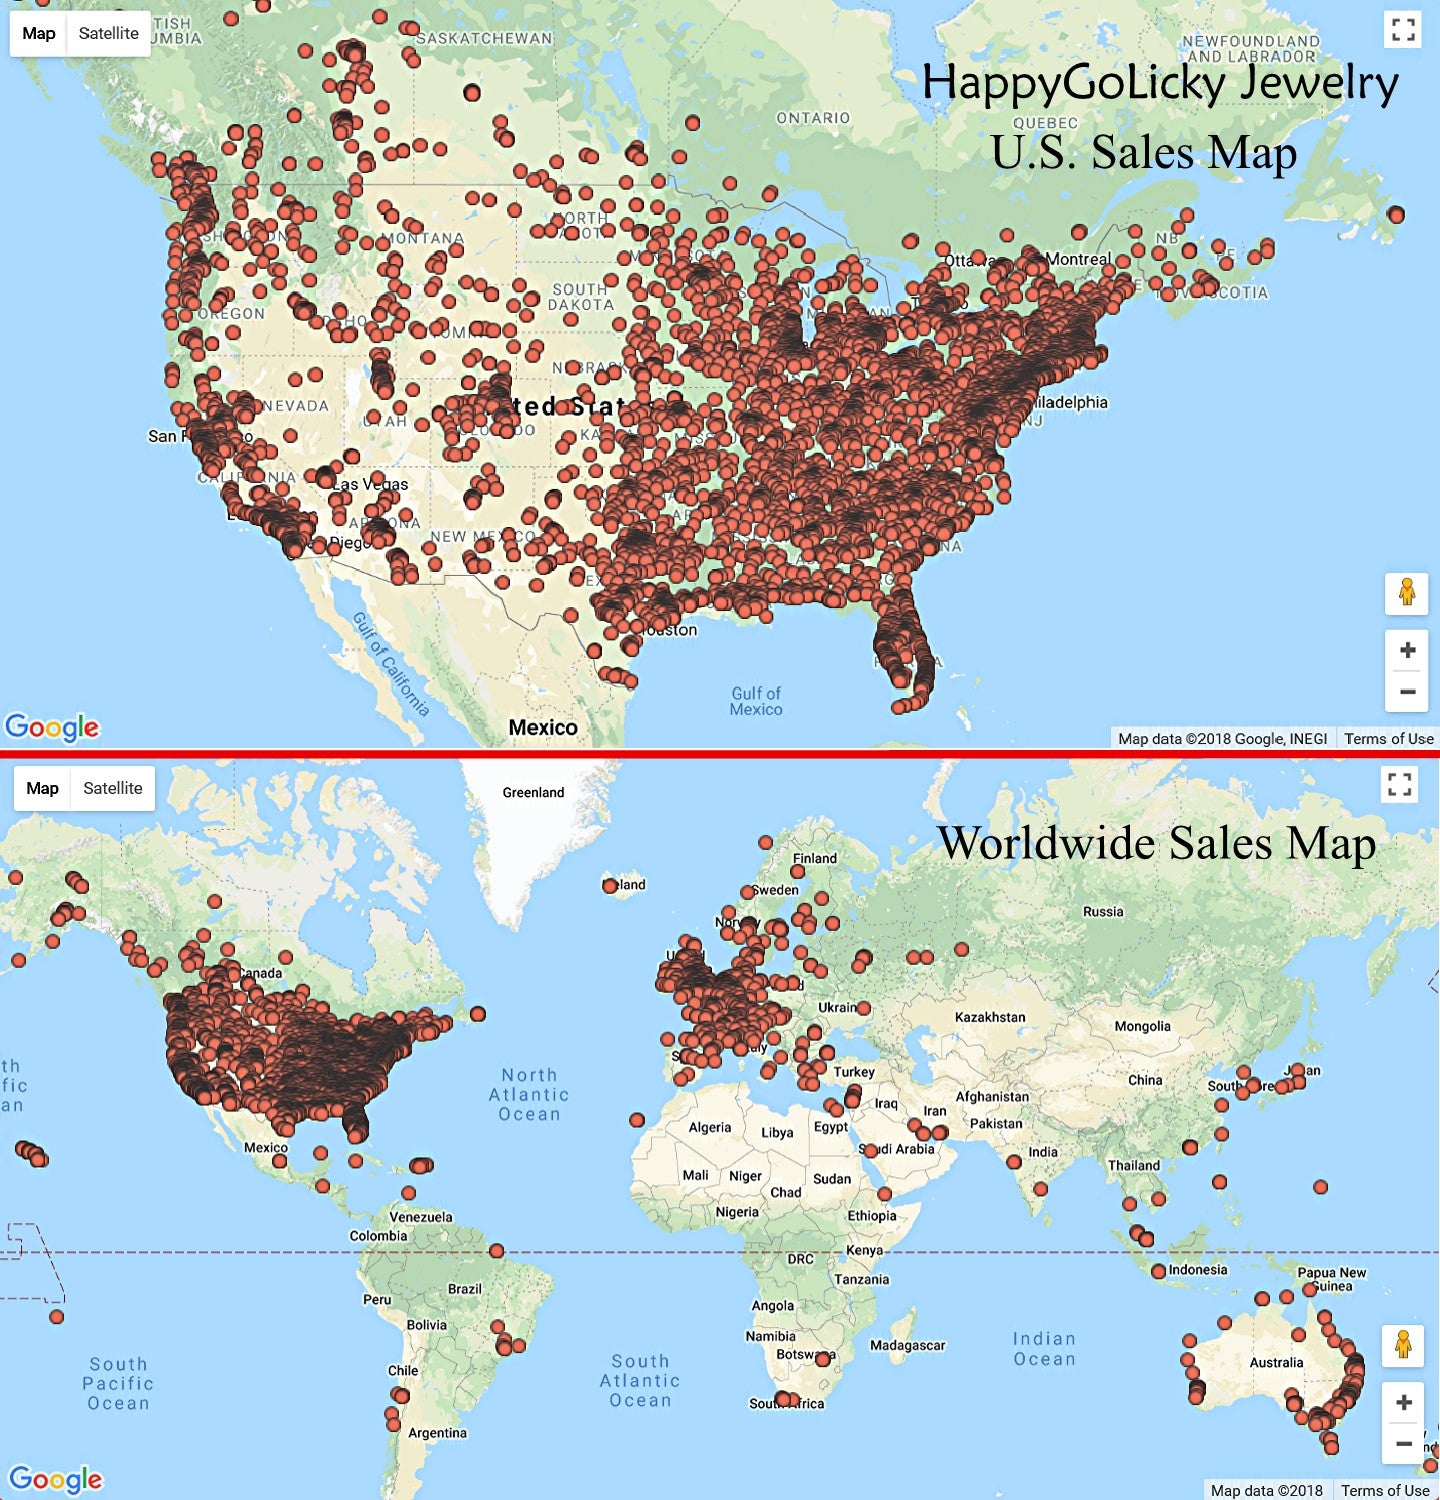 HappyGoLicky Jewelry Sales Map